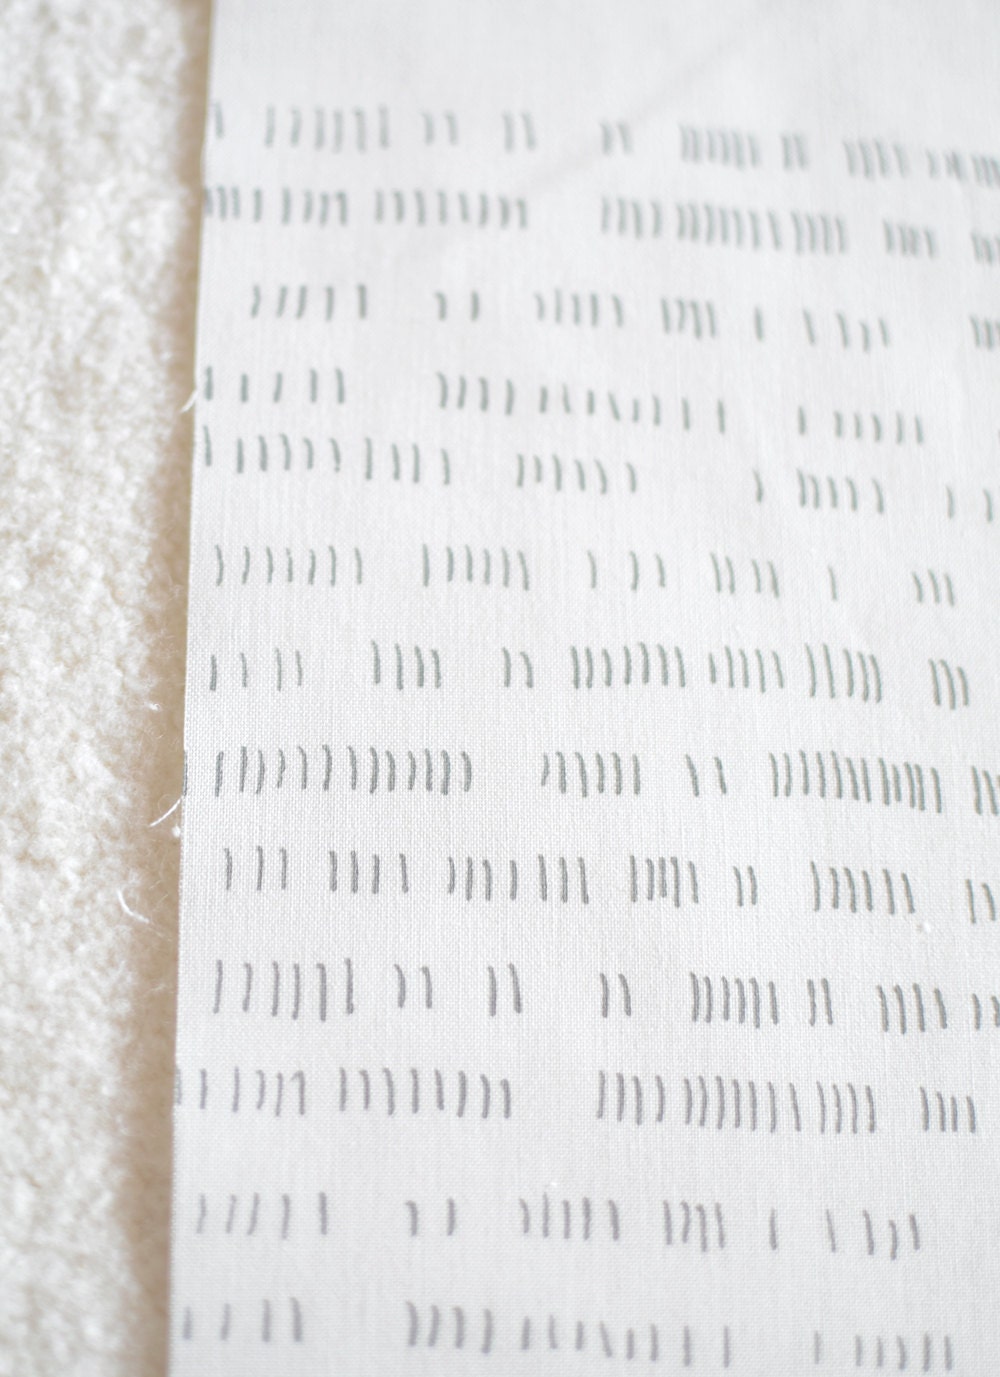 verses in soft grey on white quilting weight cotton handprinted fabric panel